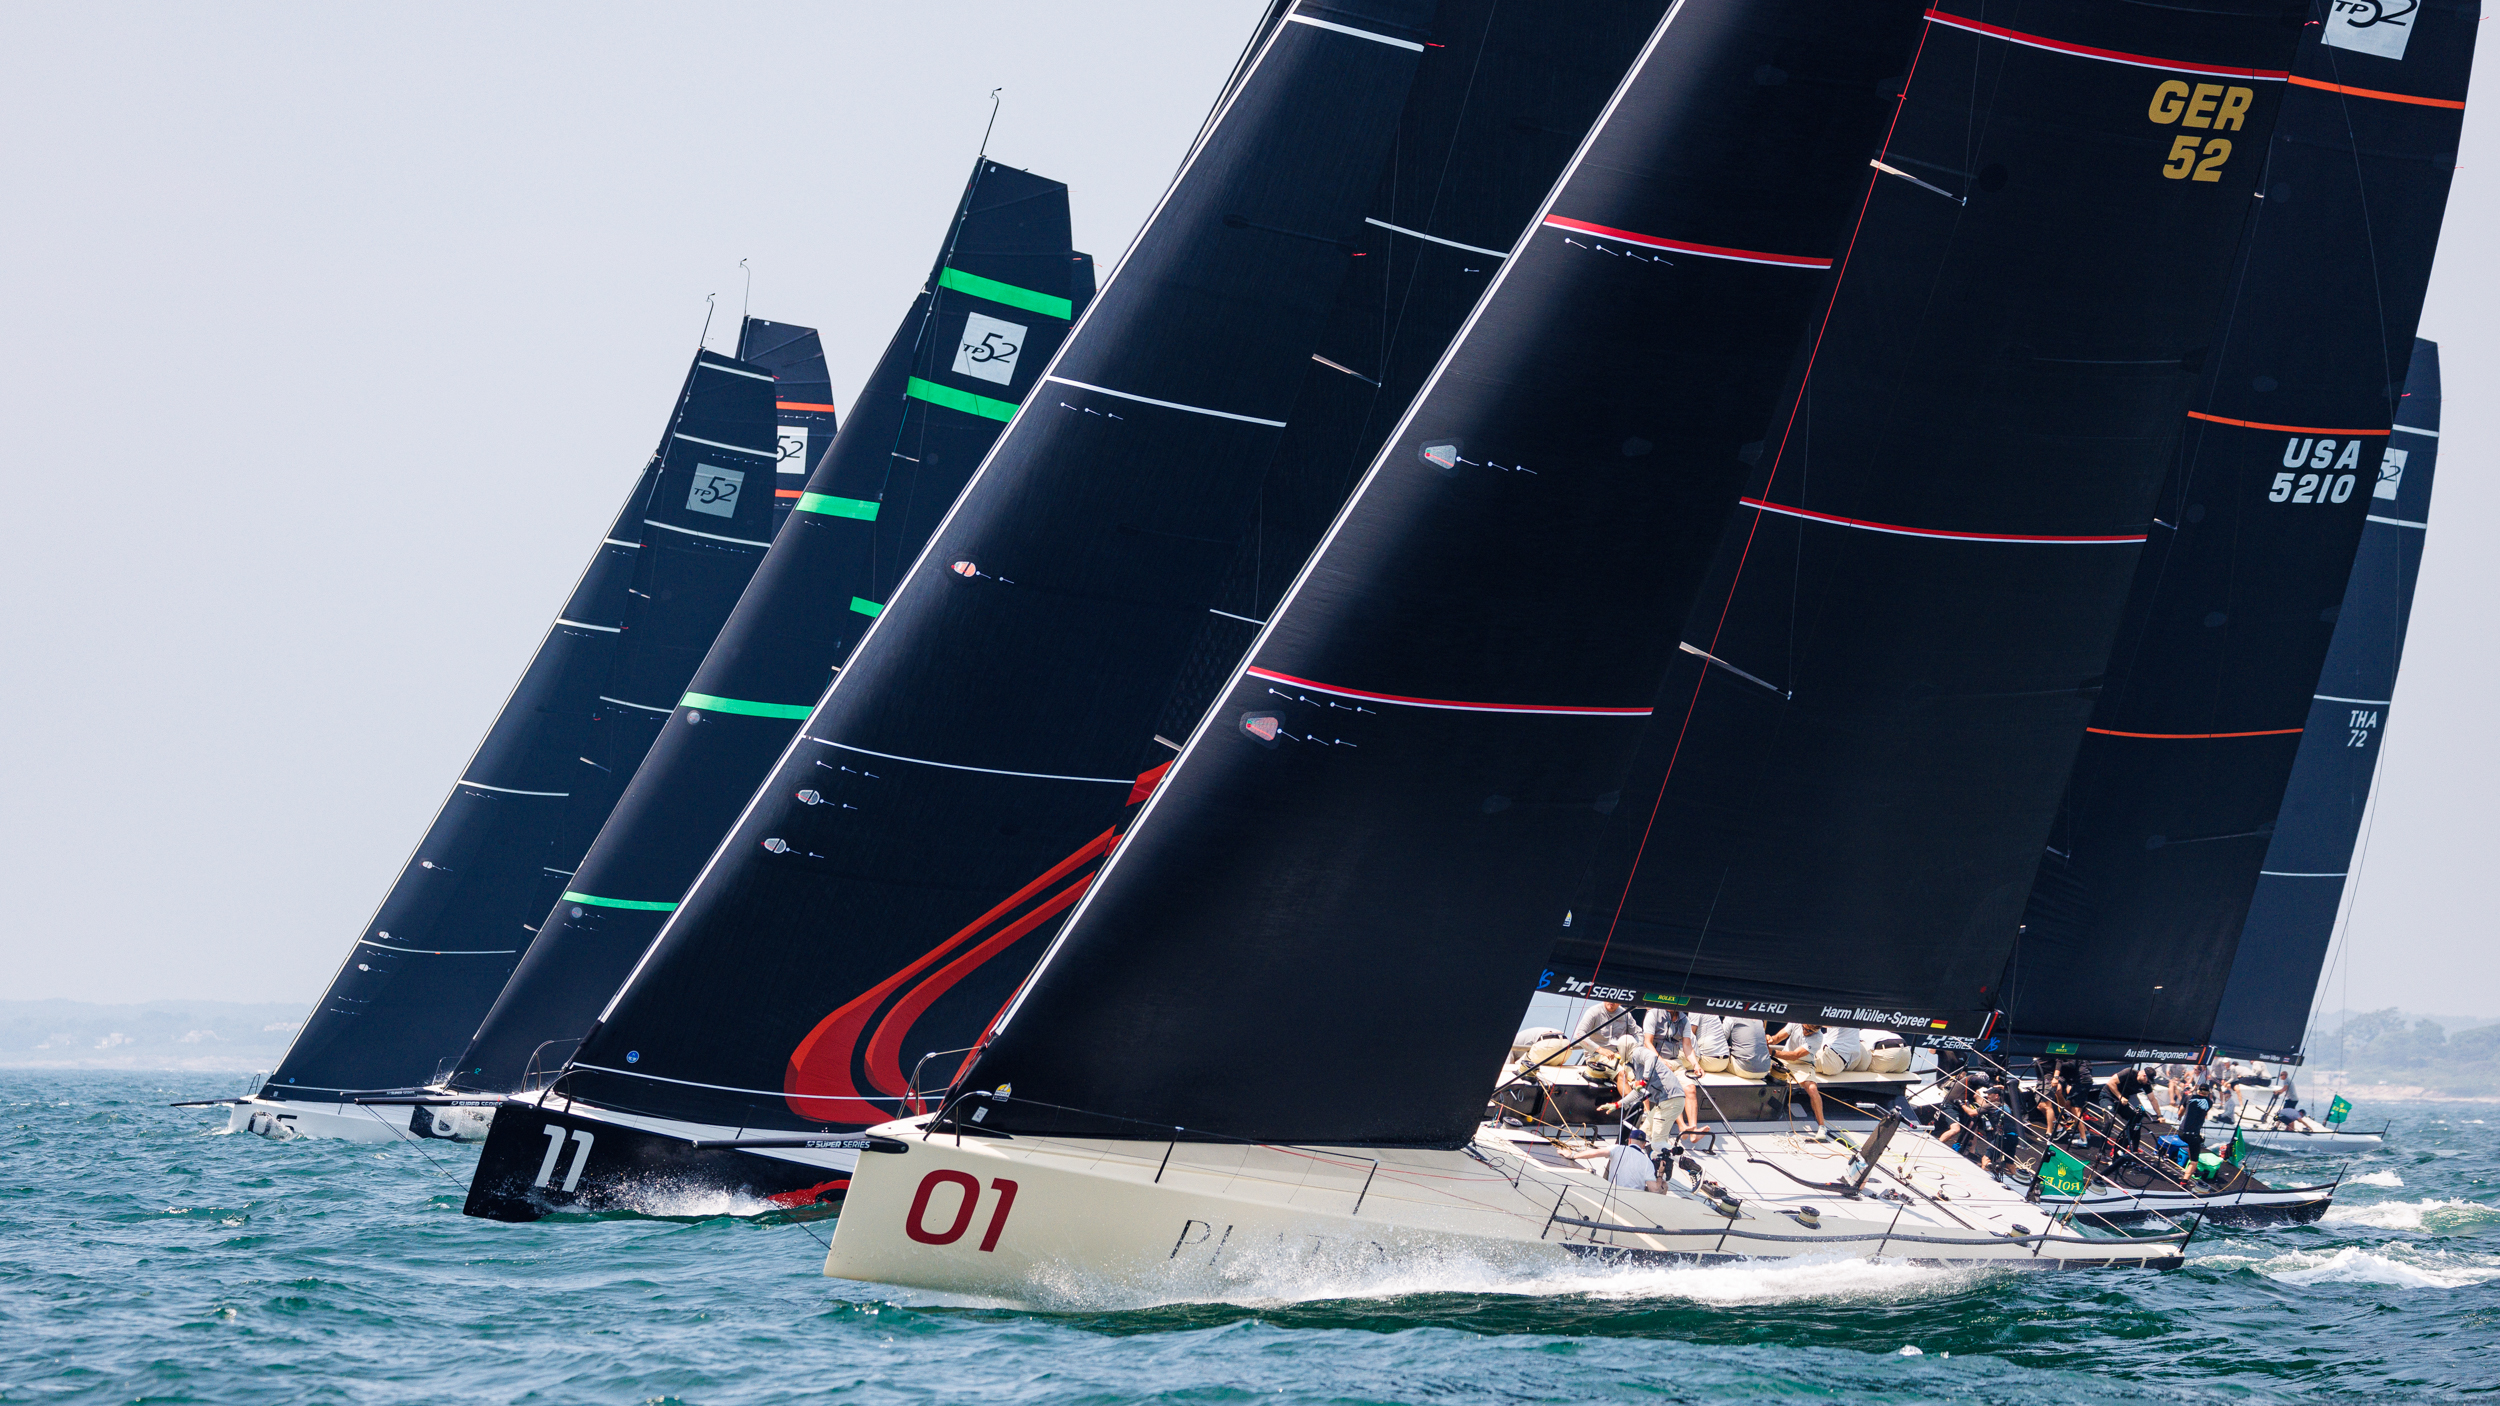 Newport’s open race course, offering multiple options is set to produce a deserving Rolex TP52 World Champion